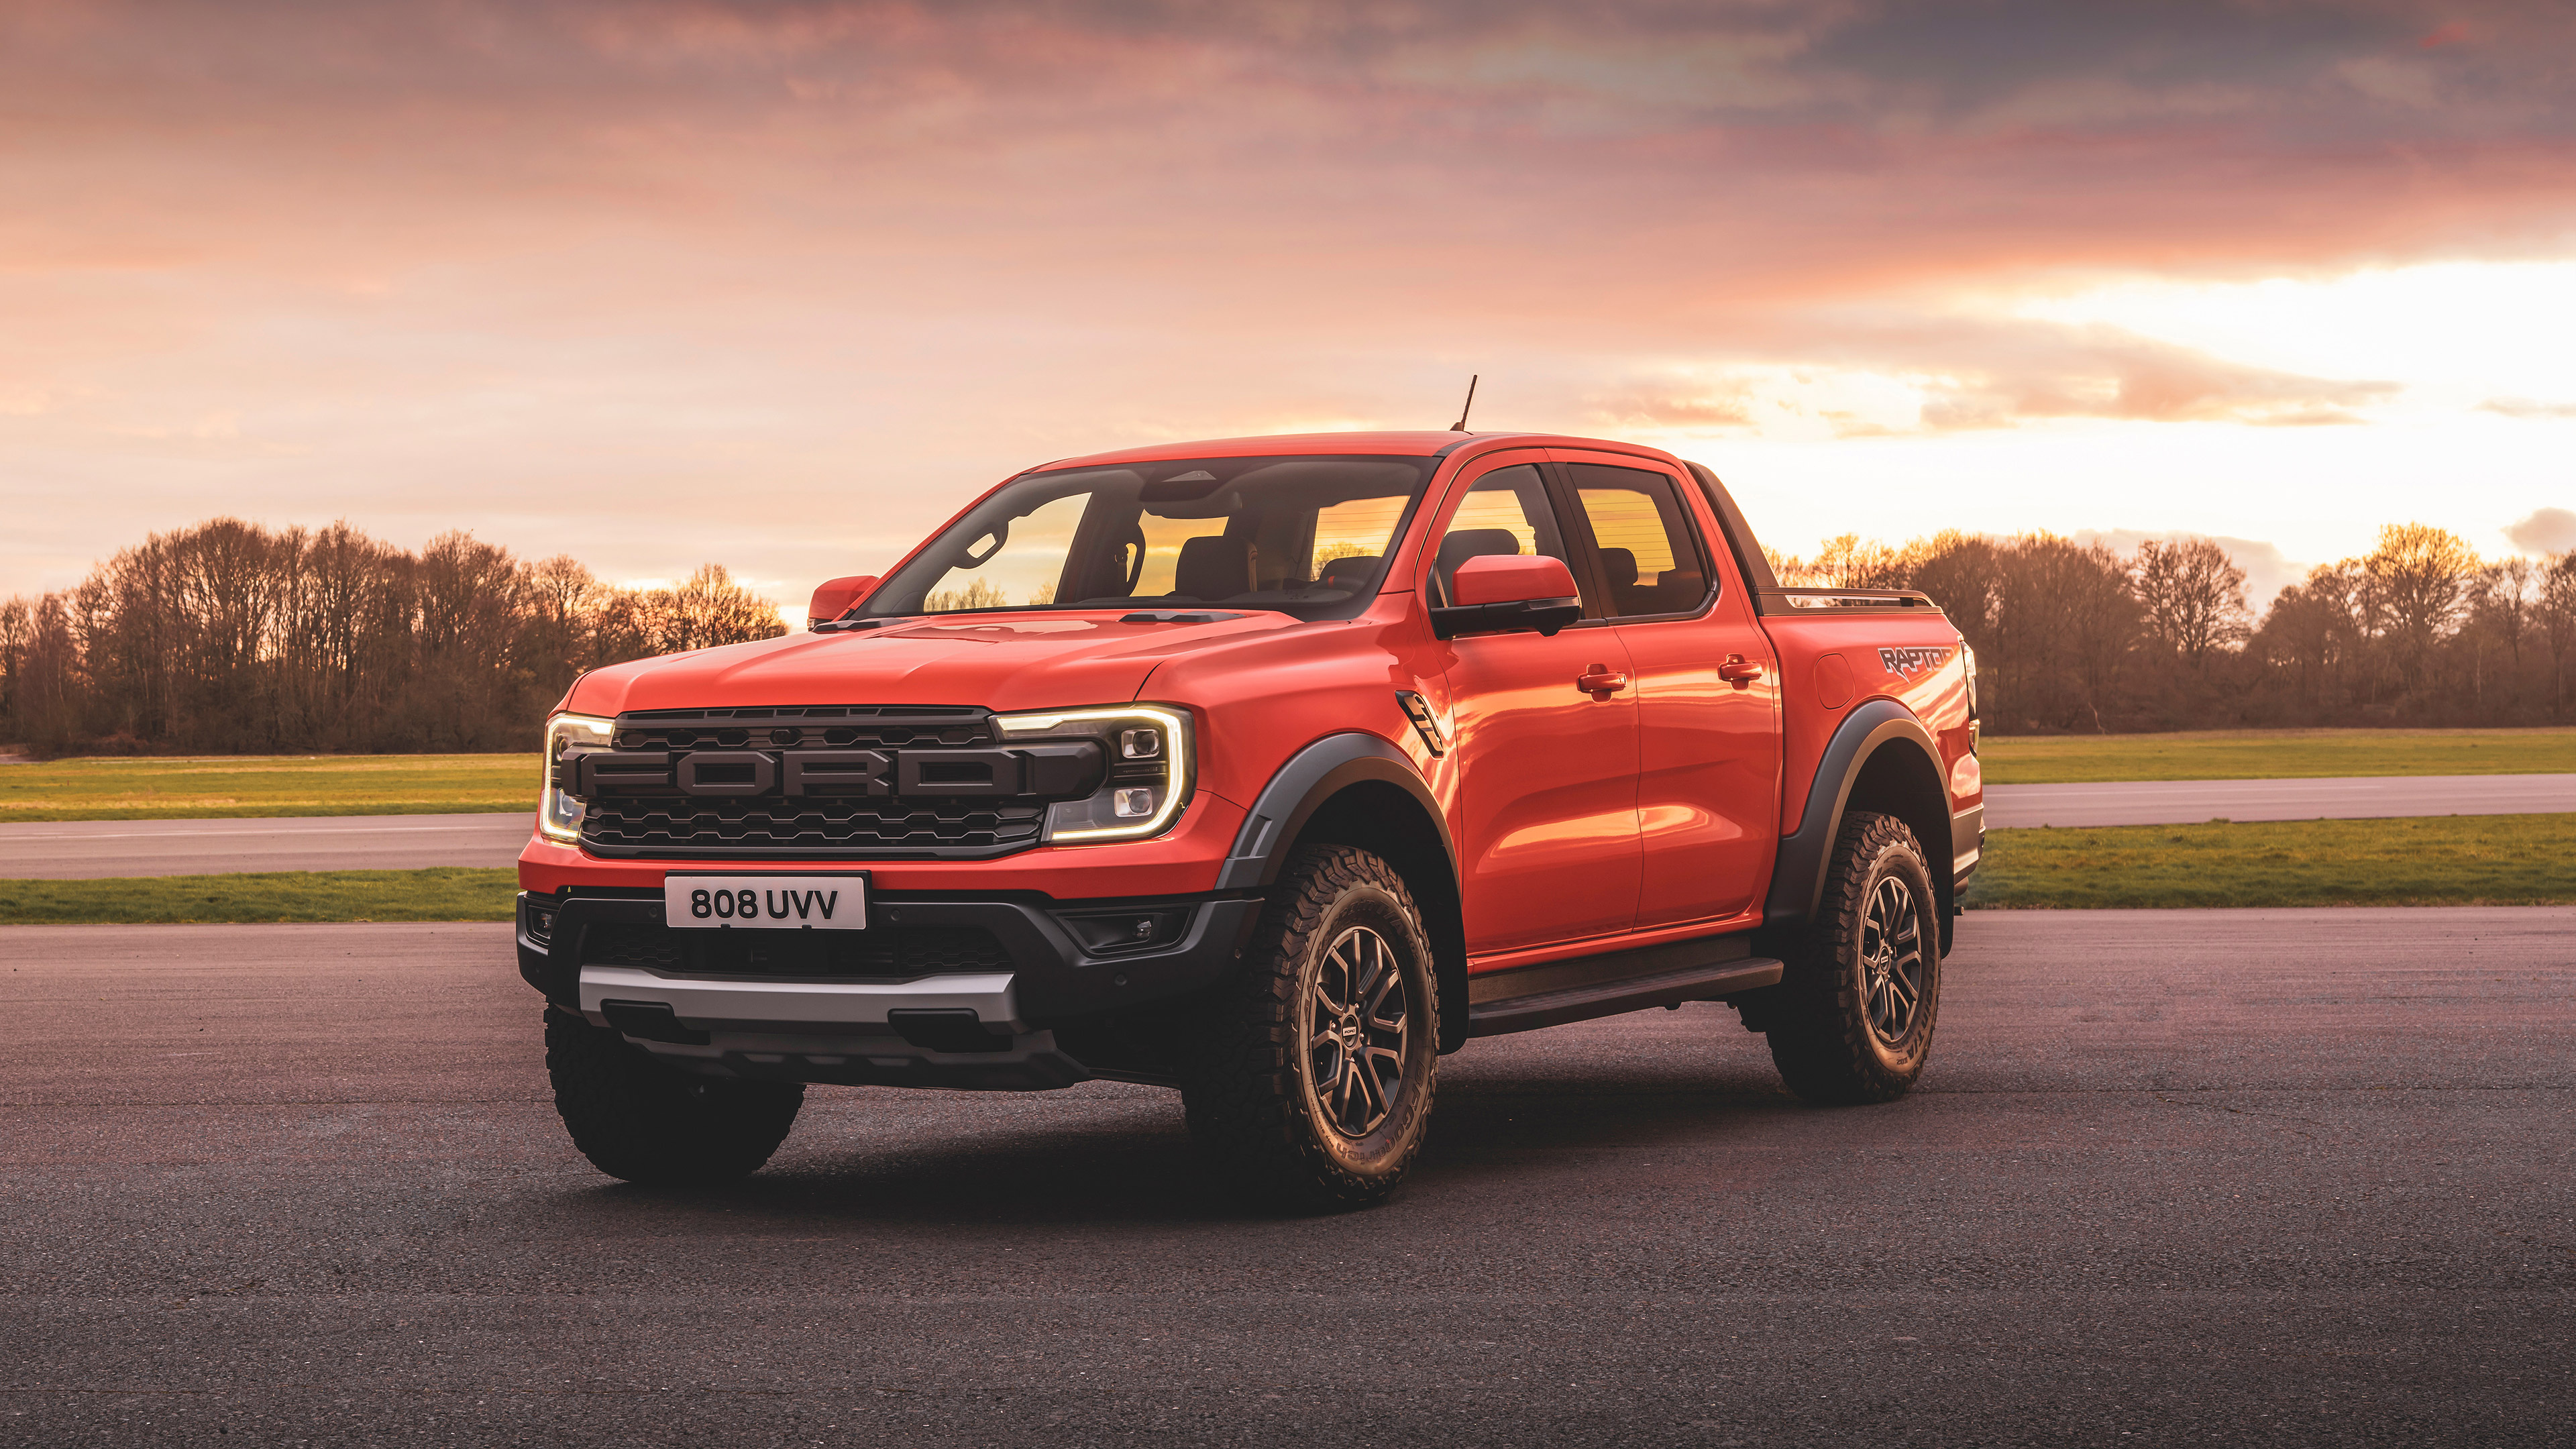 Ford Pickup: The second-generation Ranger Raptor was unveiled in February 2022. 3840x2160 4K Background.